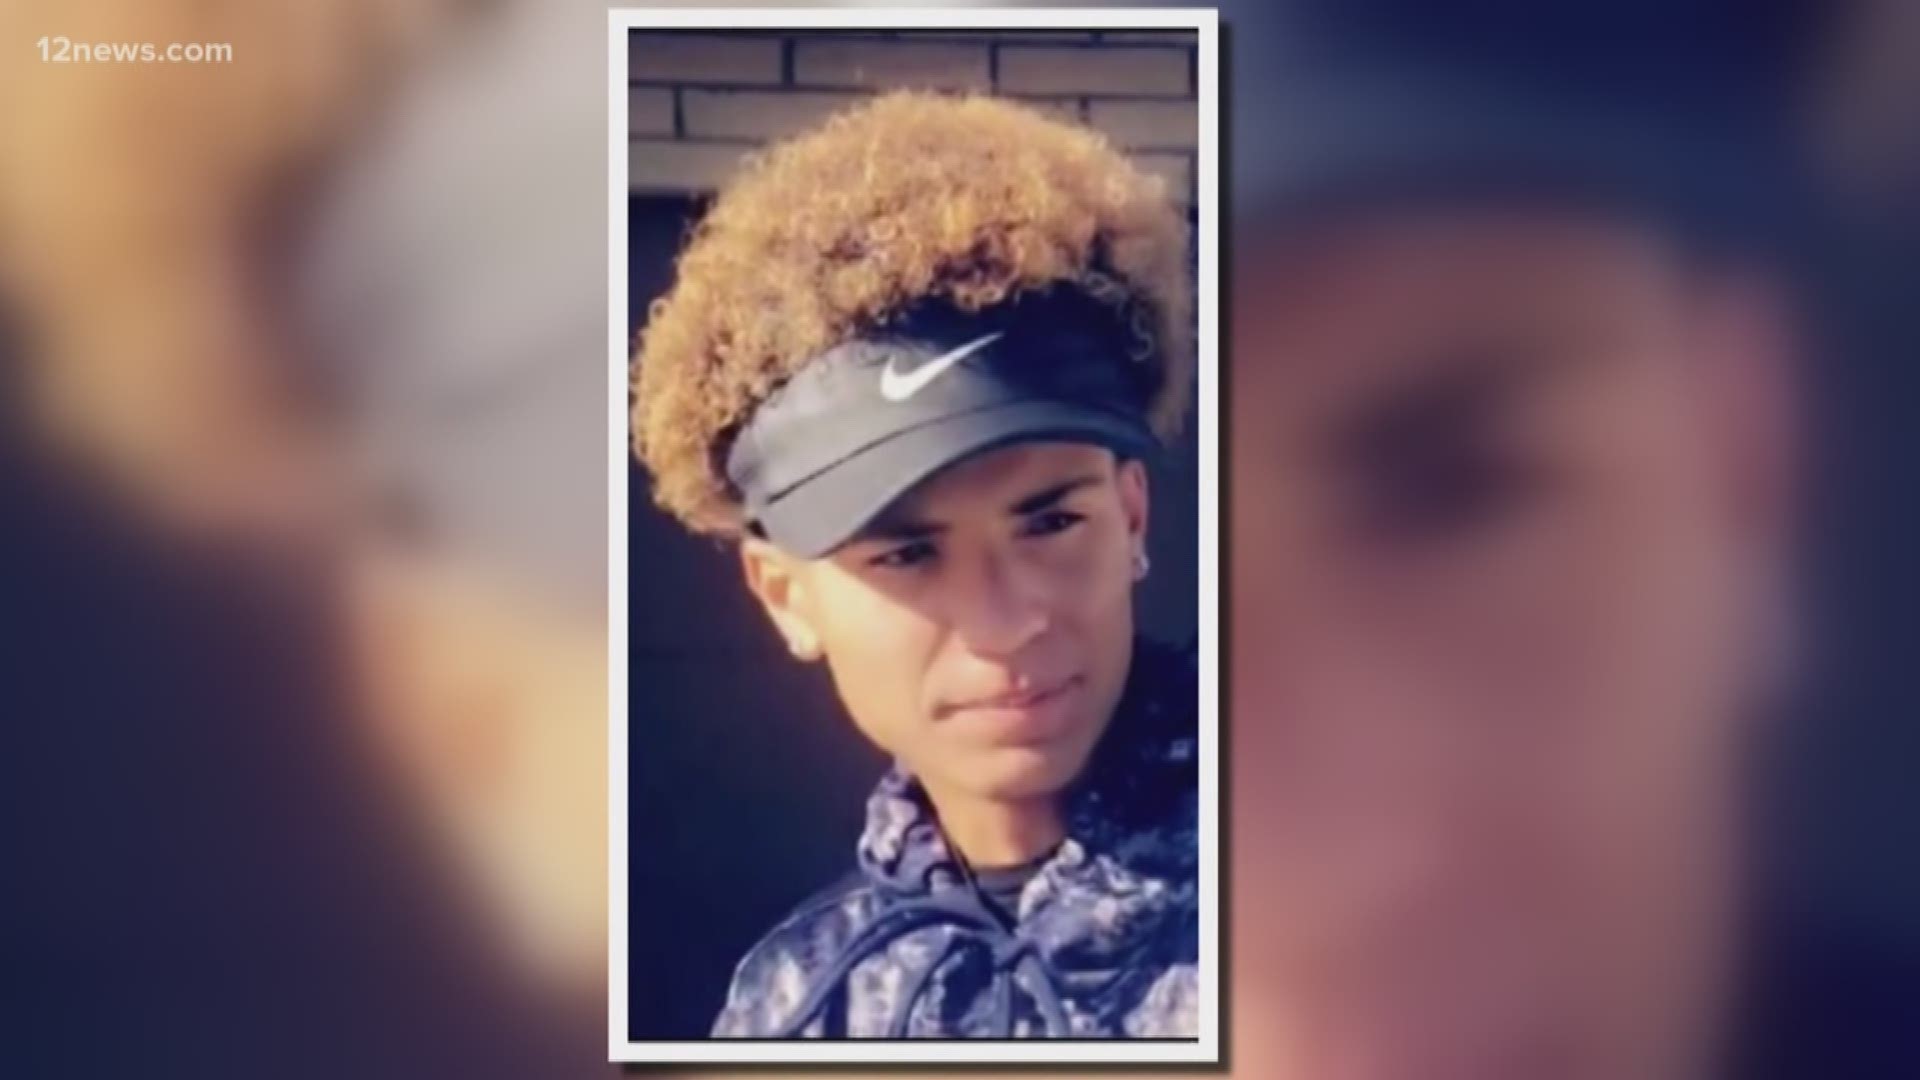 The killing of Peoria teen Elijah Al-Amin is sparking outrage after his accused killer tells police he stabbed the teen because his rap music was too loud. The county attorney has filed first-degree murder charges, but there is a nationwide push to consider the murder a hate crime.